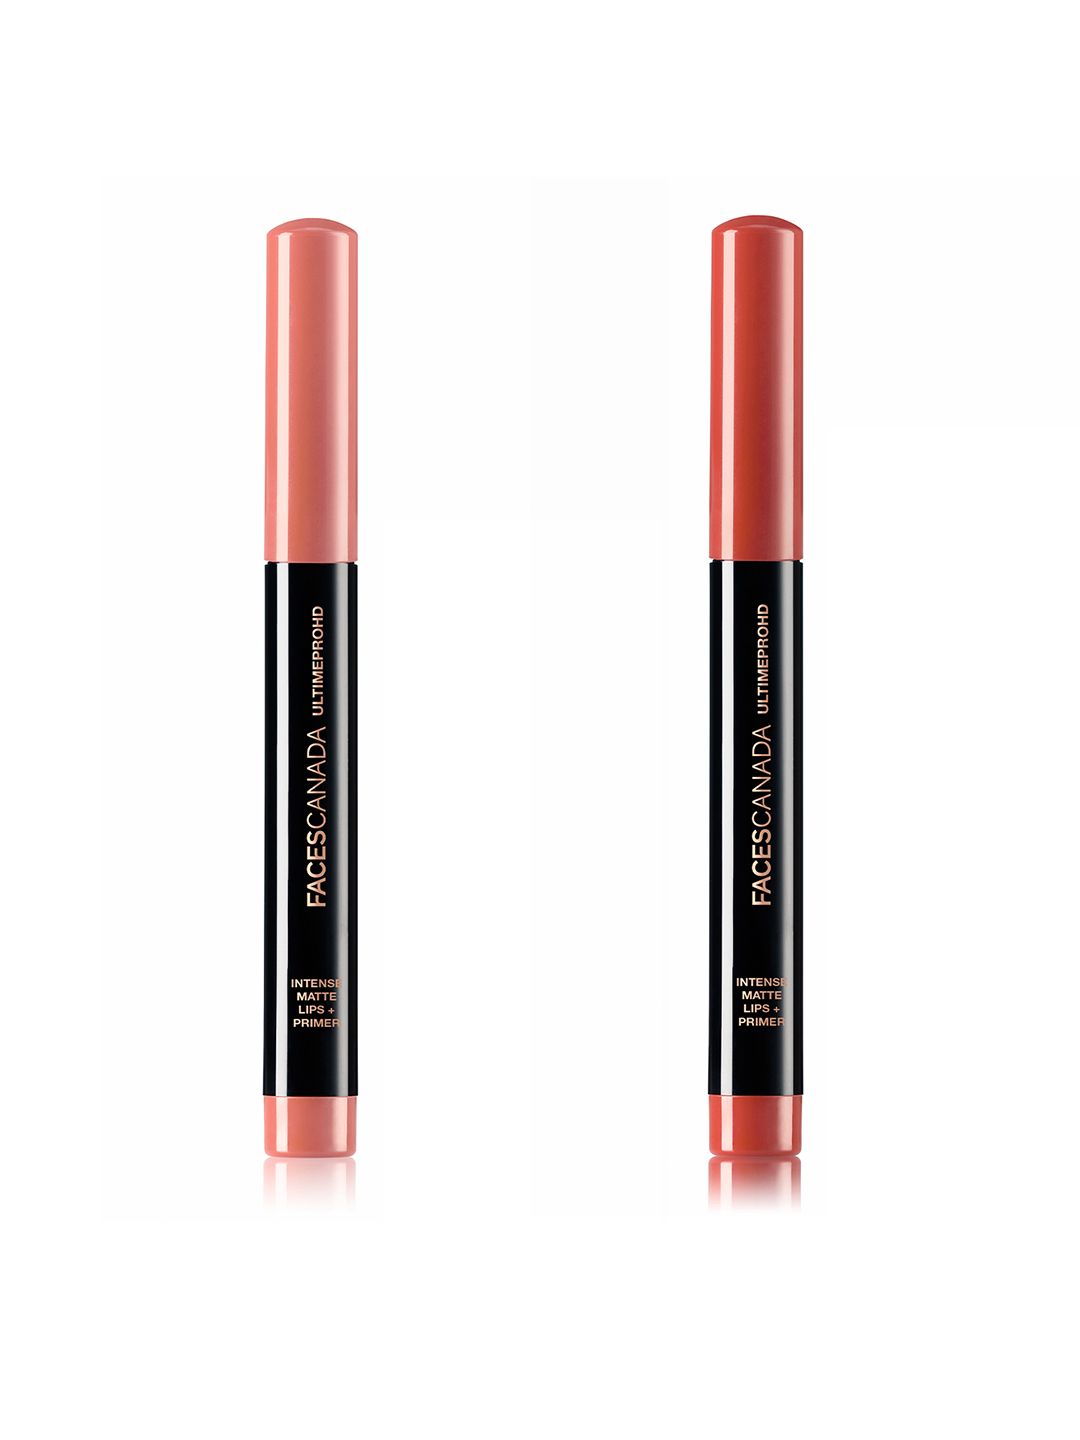 FACES CANADA Set of 2 UltimePro HD Intense Matte Lipsticks - Tease 14 & Obsessed 15 Price in India